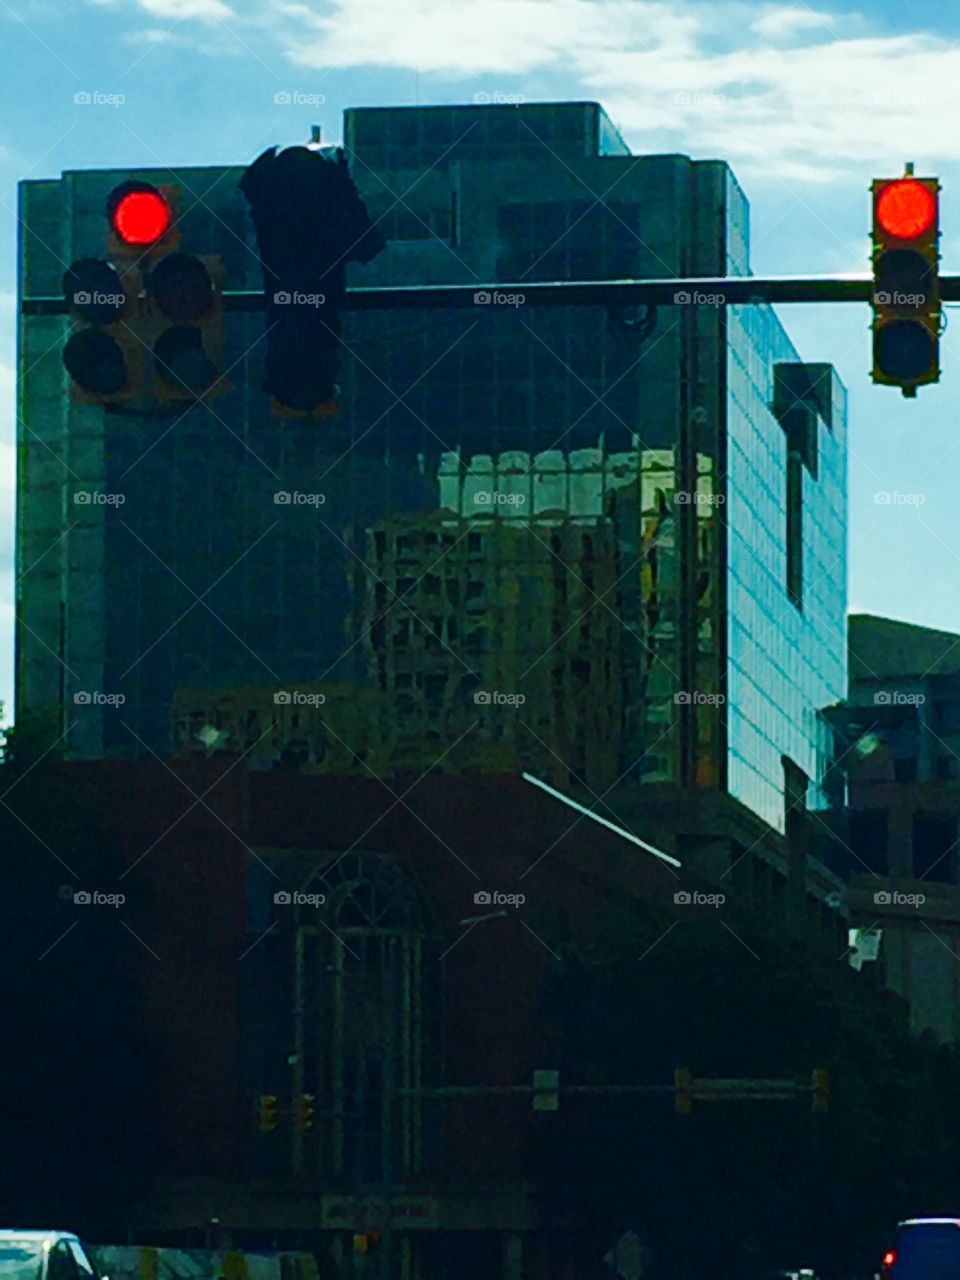 Red lights building reflection